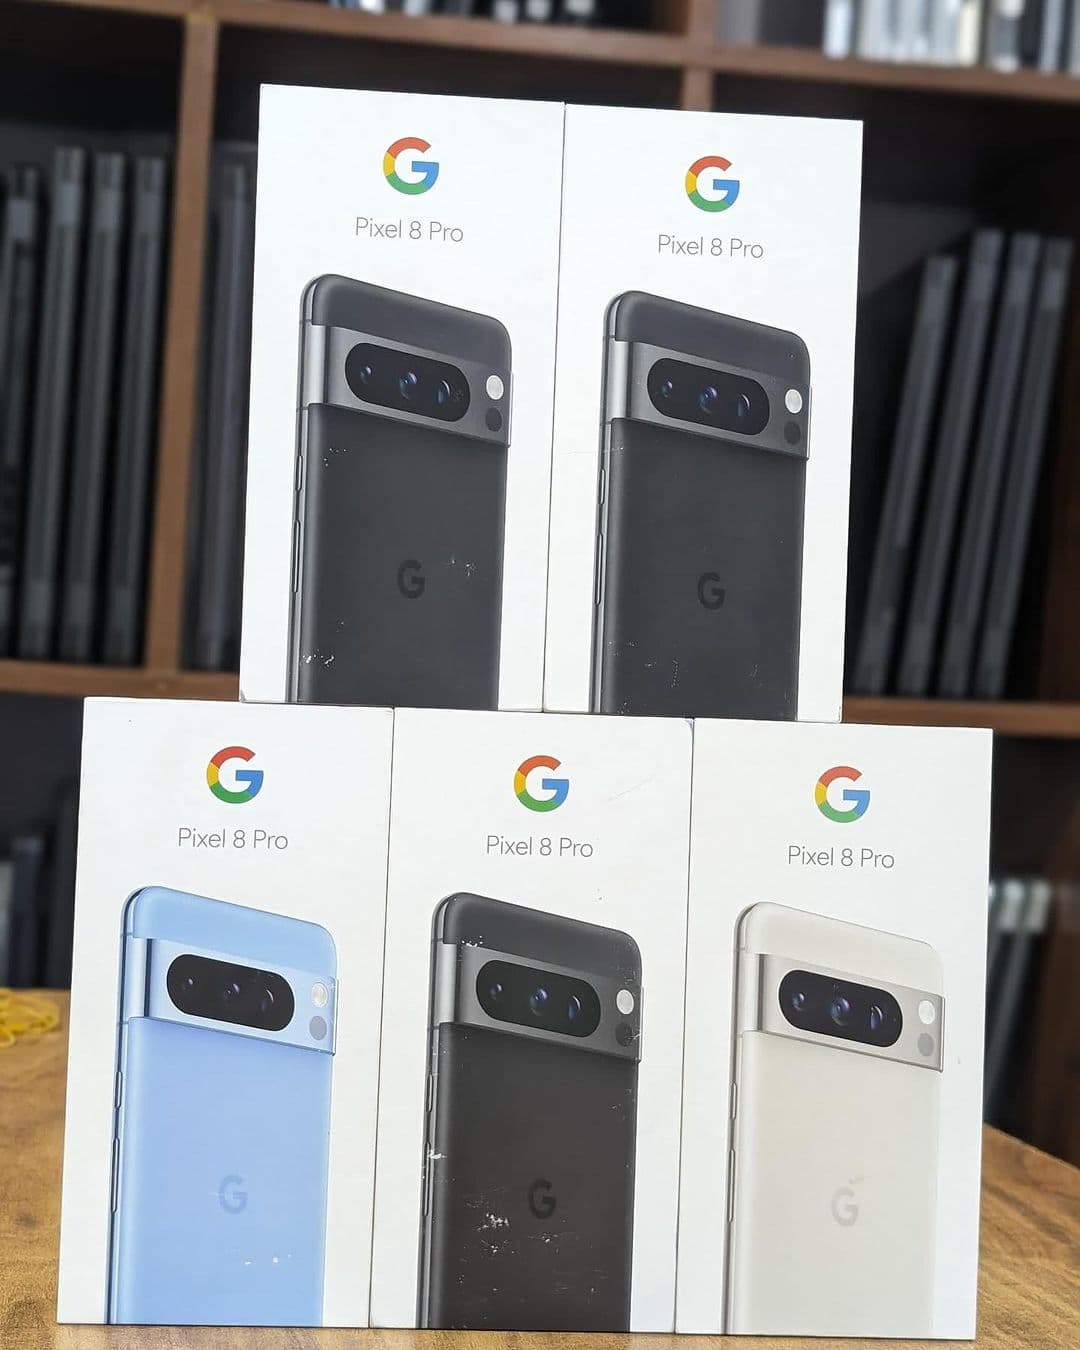 Brand New Google Pixel 8 Pro 256GB with Telephoto Lens and Super Actua Display Unlocked